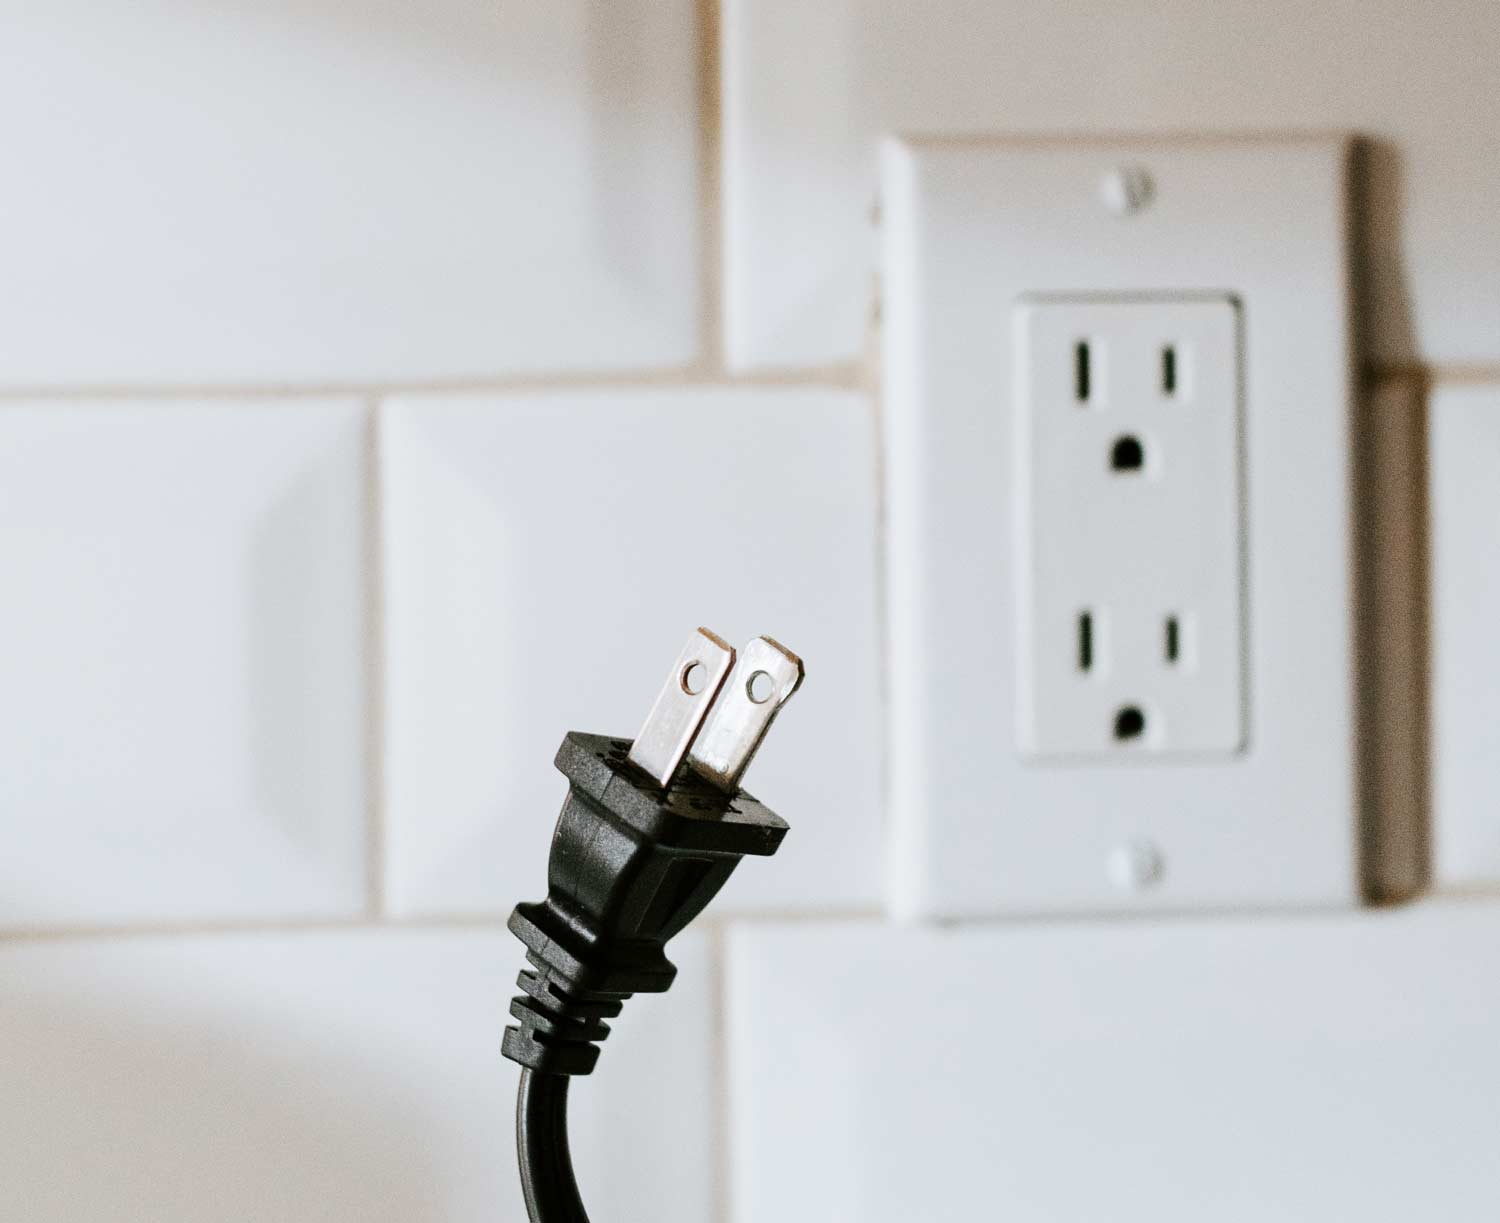 Power cable and electrical outlet